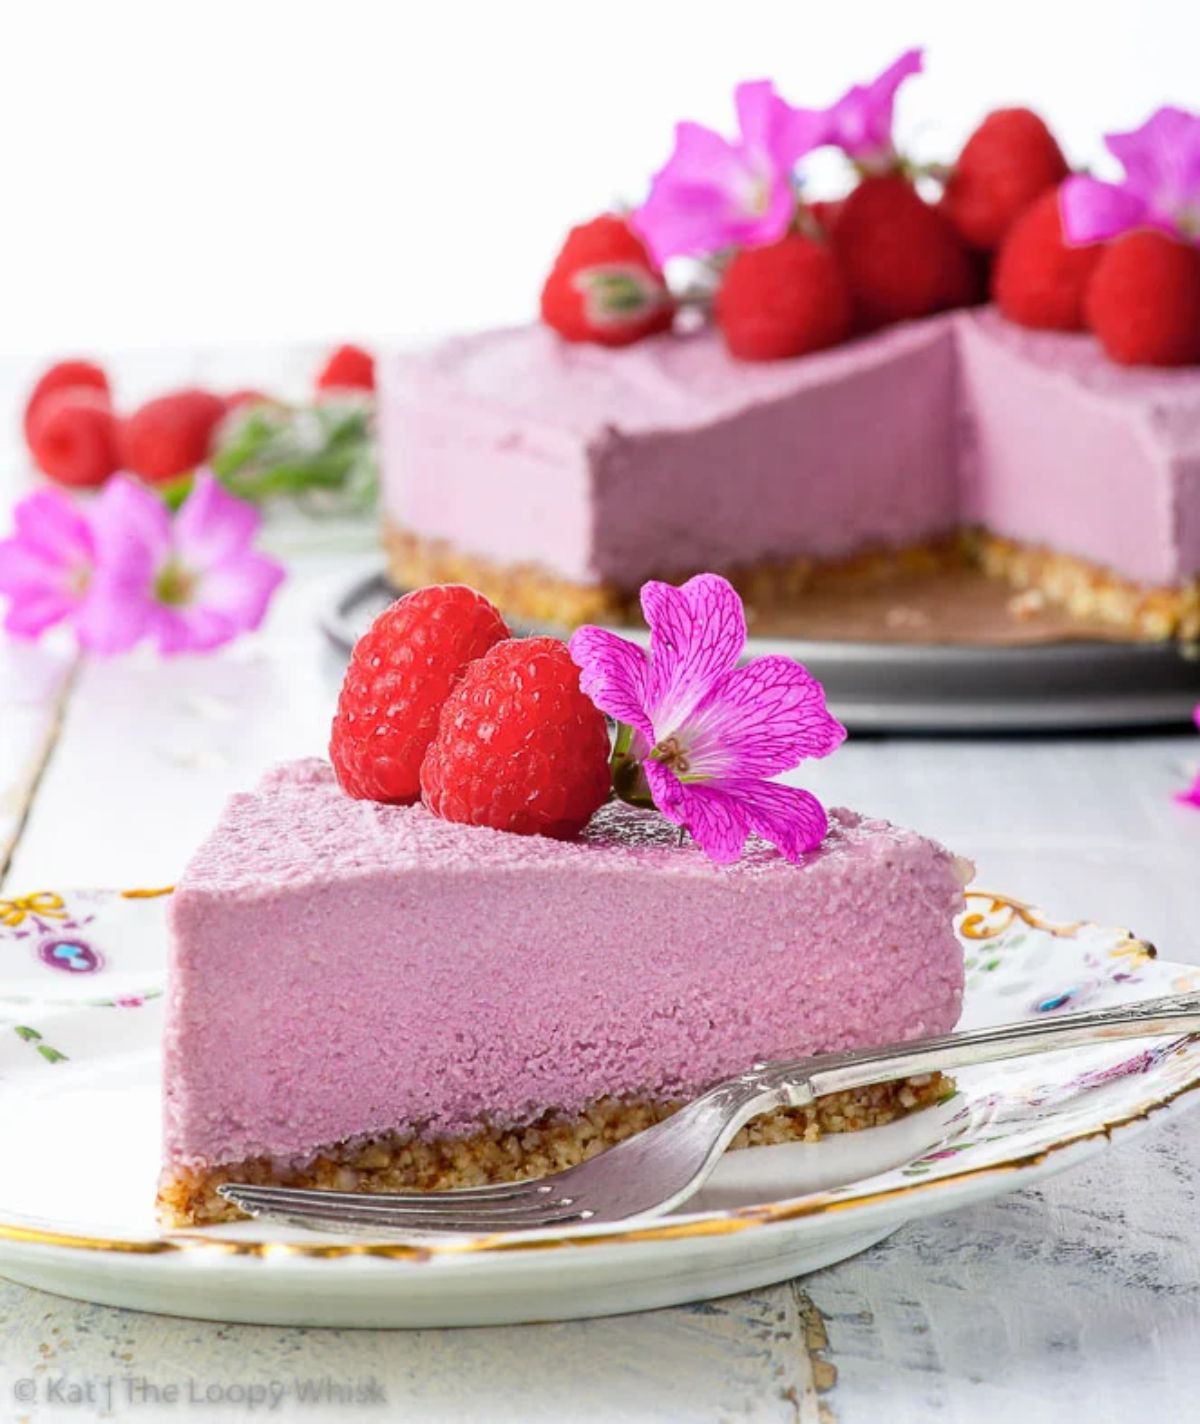 a patterened plate with a livlac colored cheesecake on top, topped with fresh raspebrries and flowers